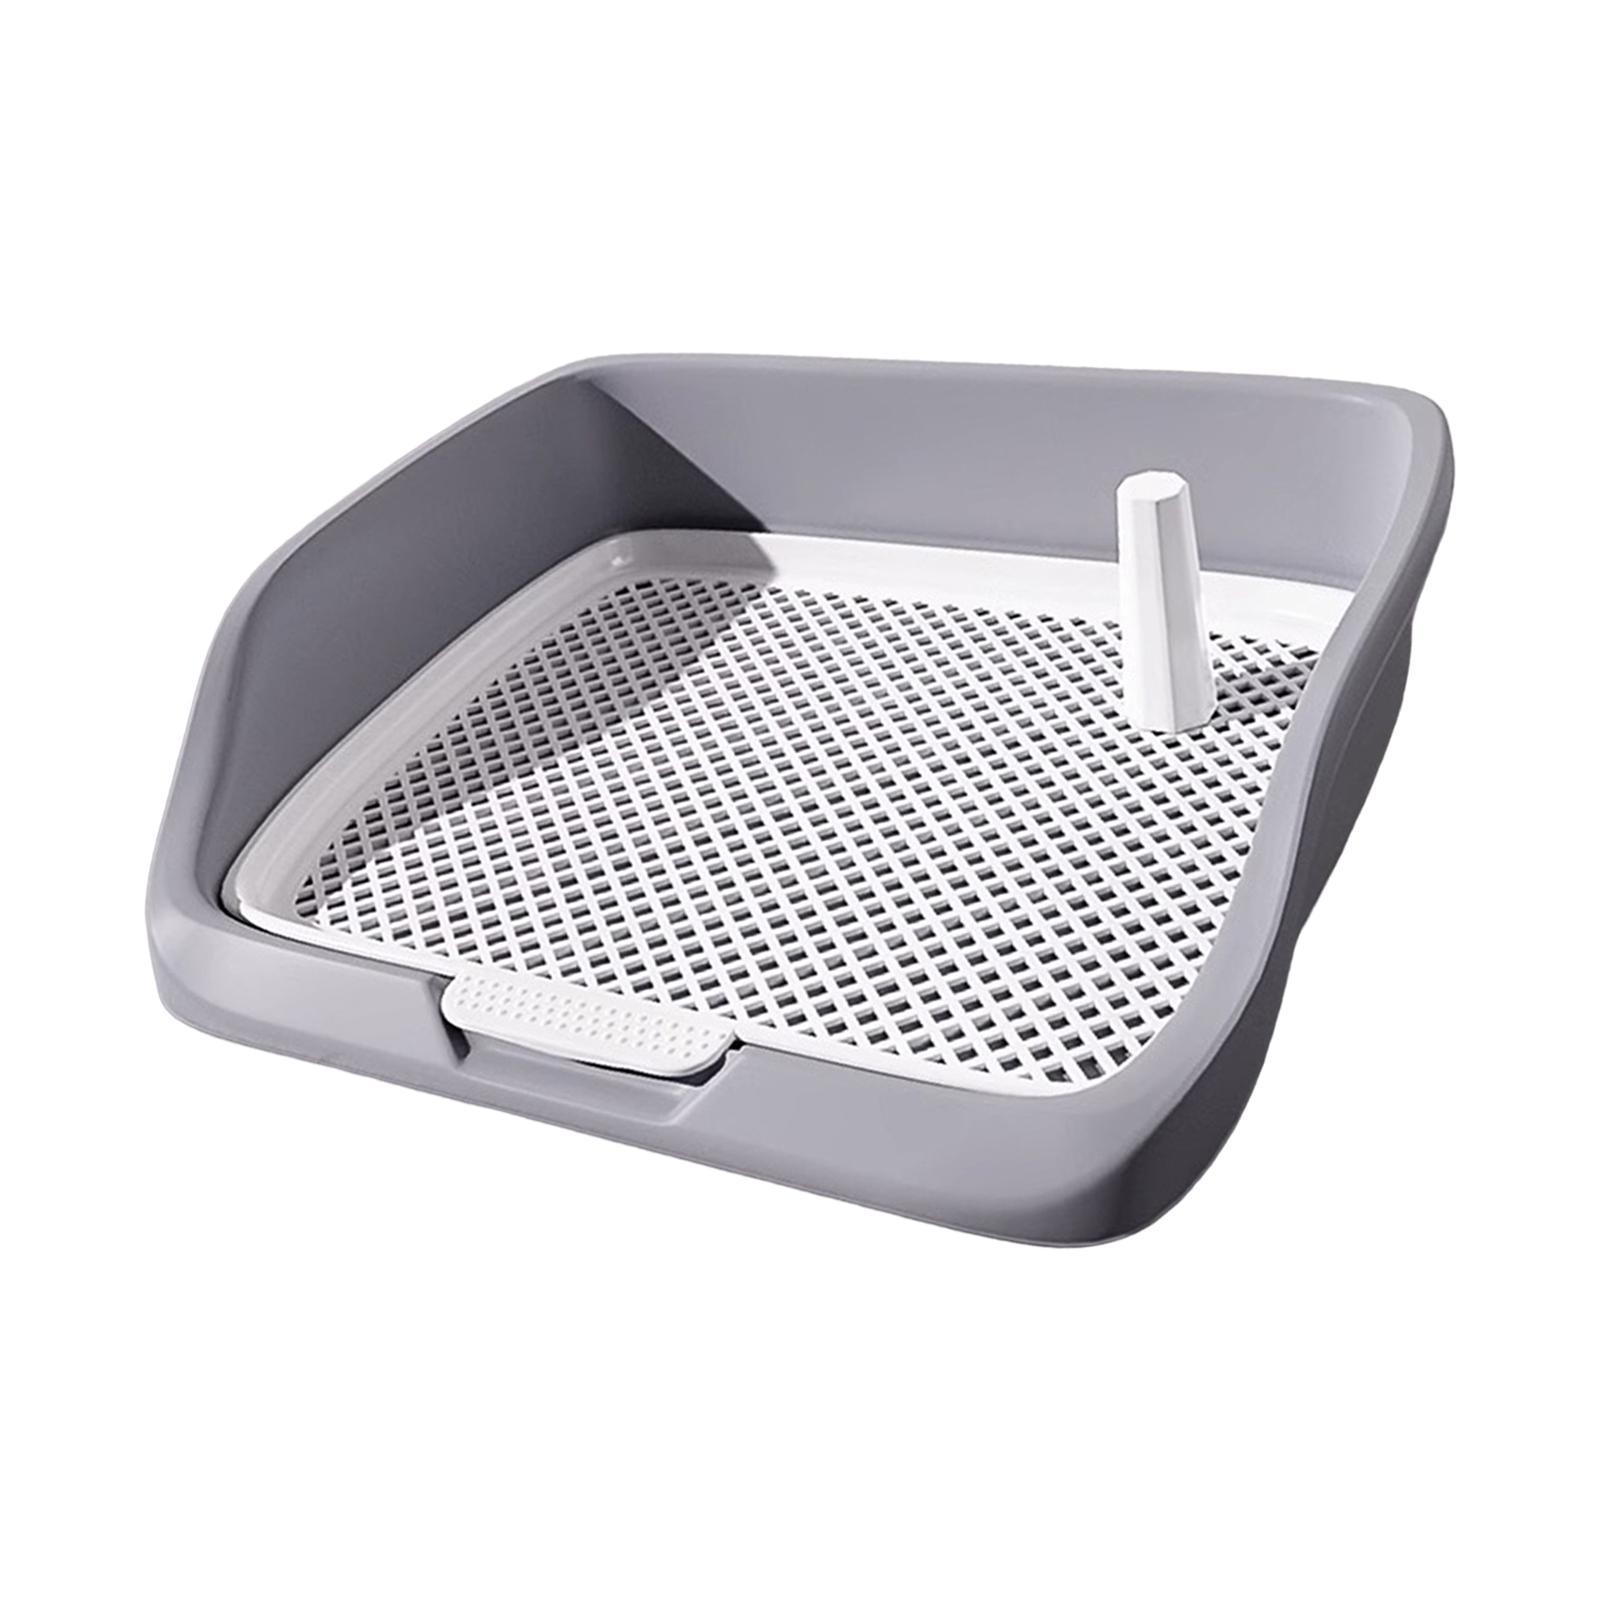 Dog Toilet Puppy Potty Tray for Cat Dog Potty Pan Indoor Reusable Litter Box